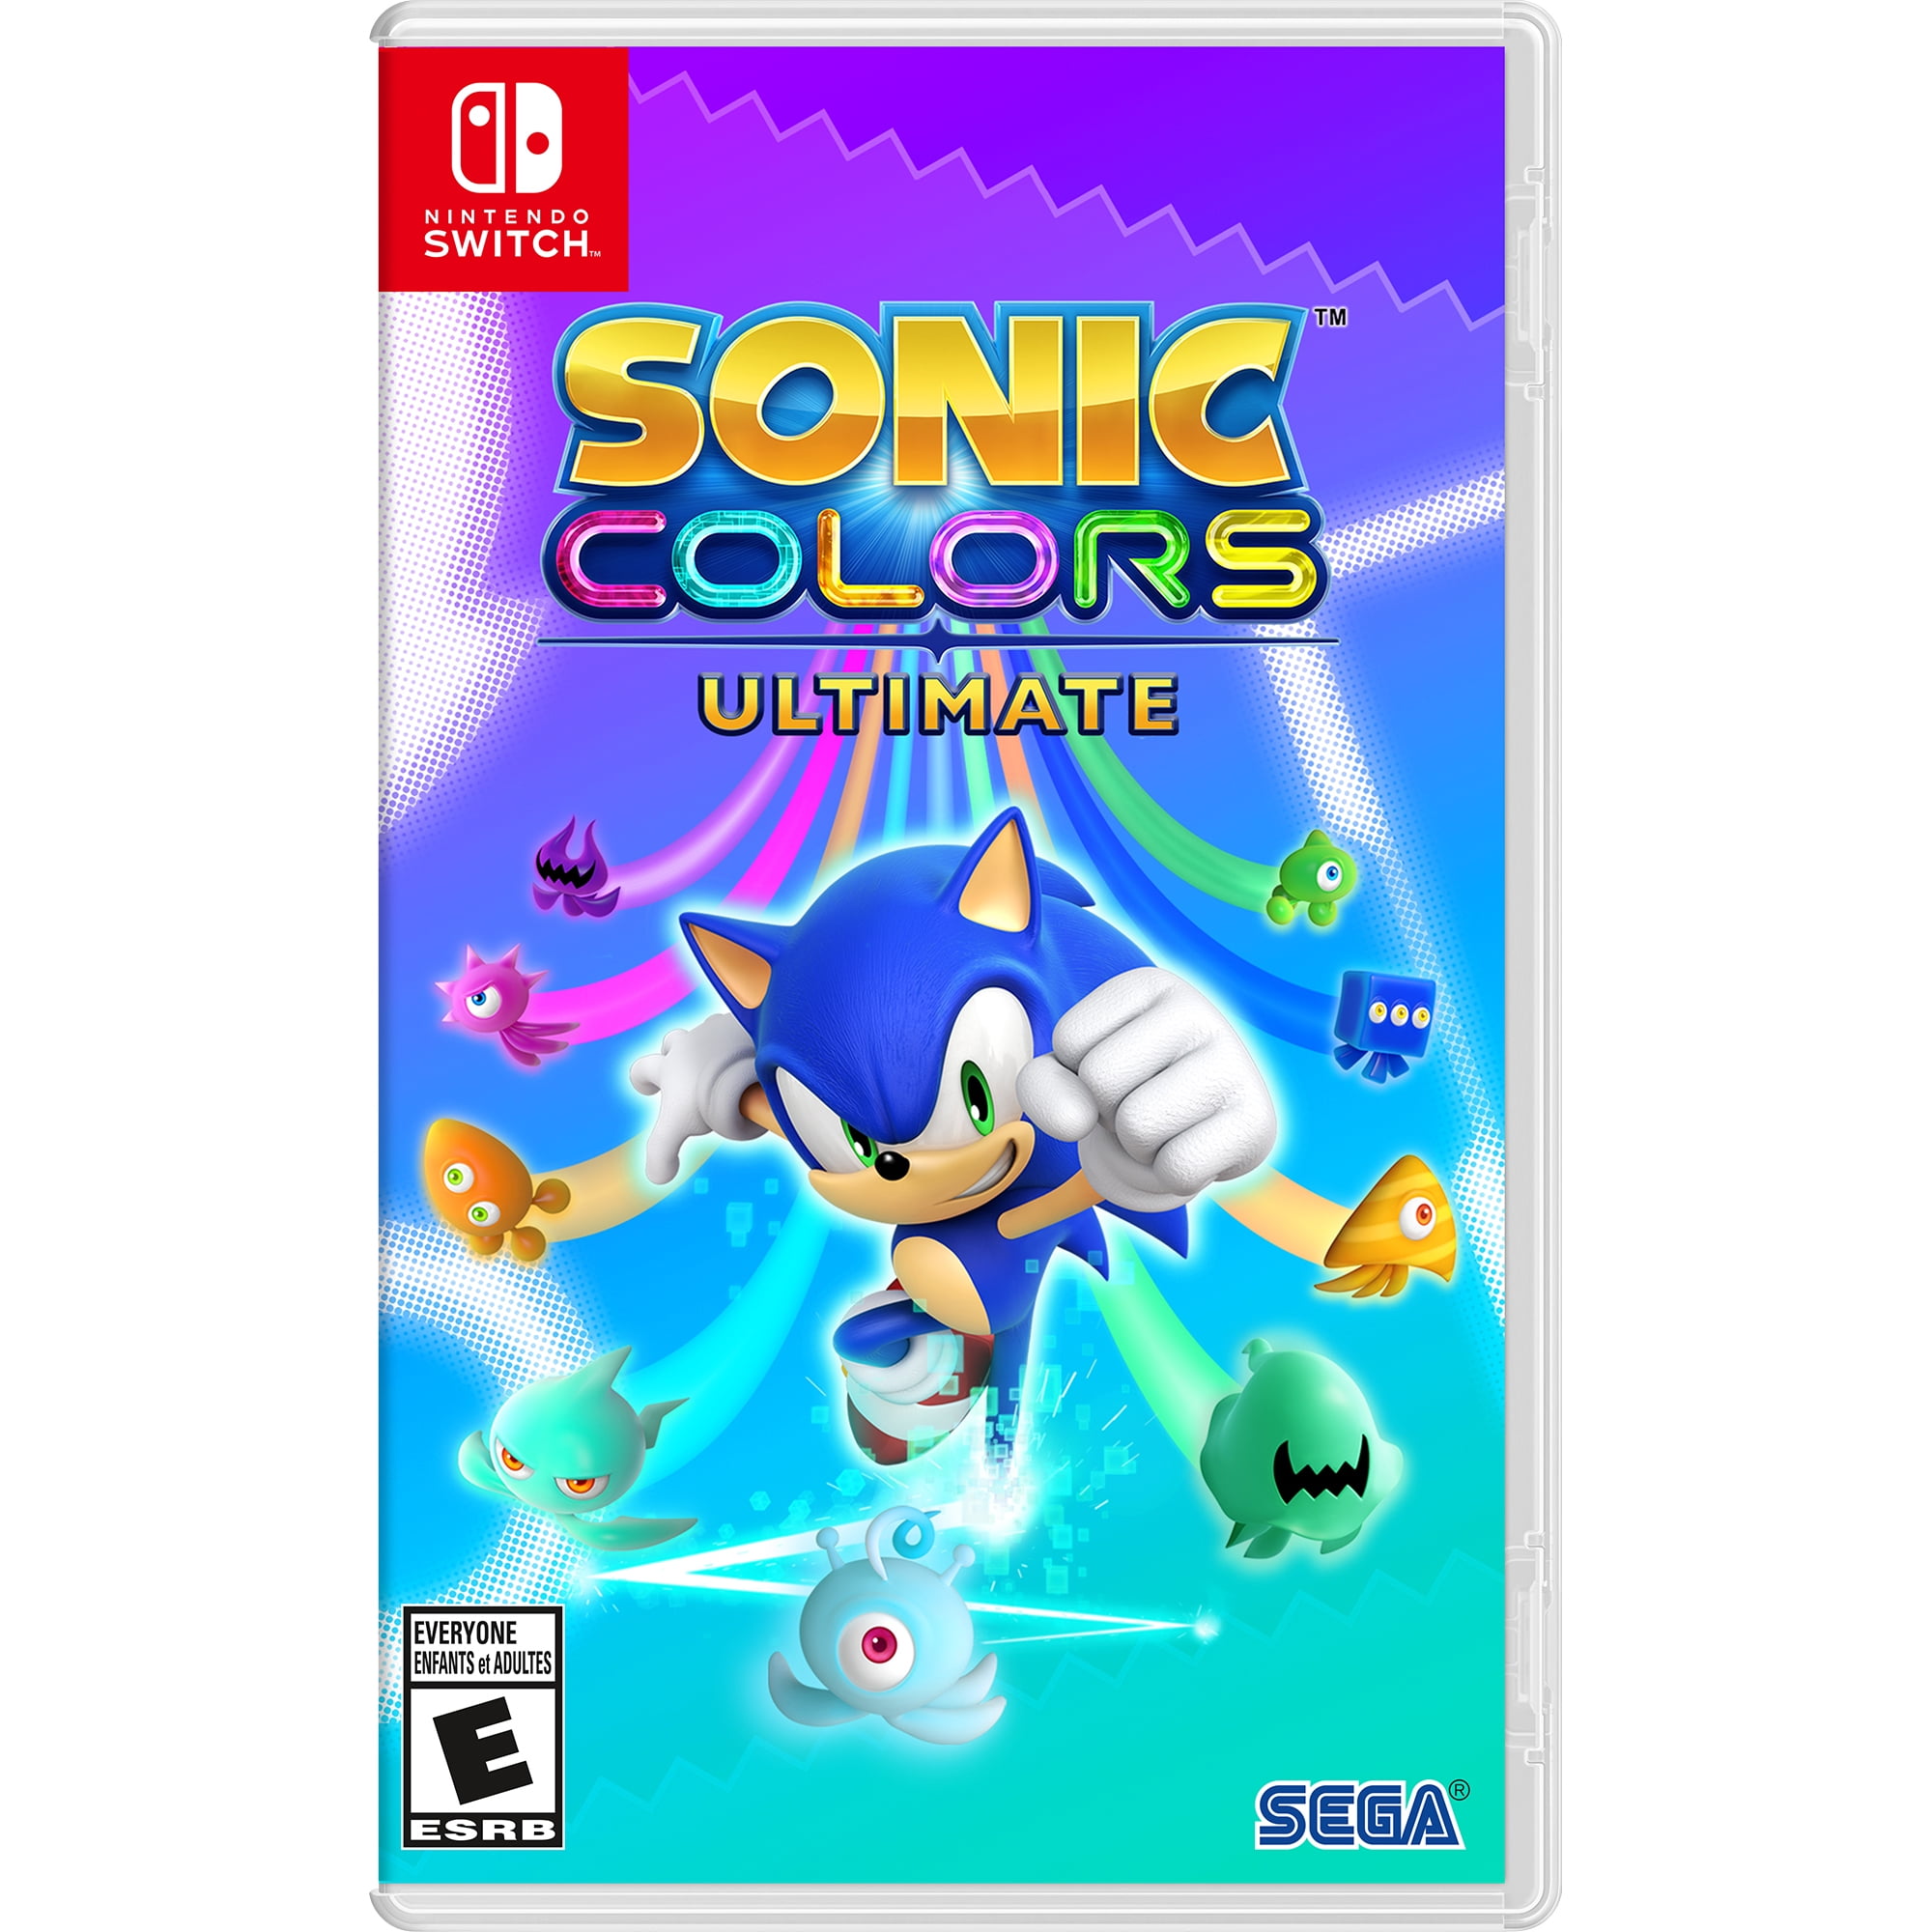 Sonic Colors Nintendo DS Game Complete CIB Authentic Tested and